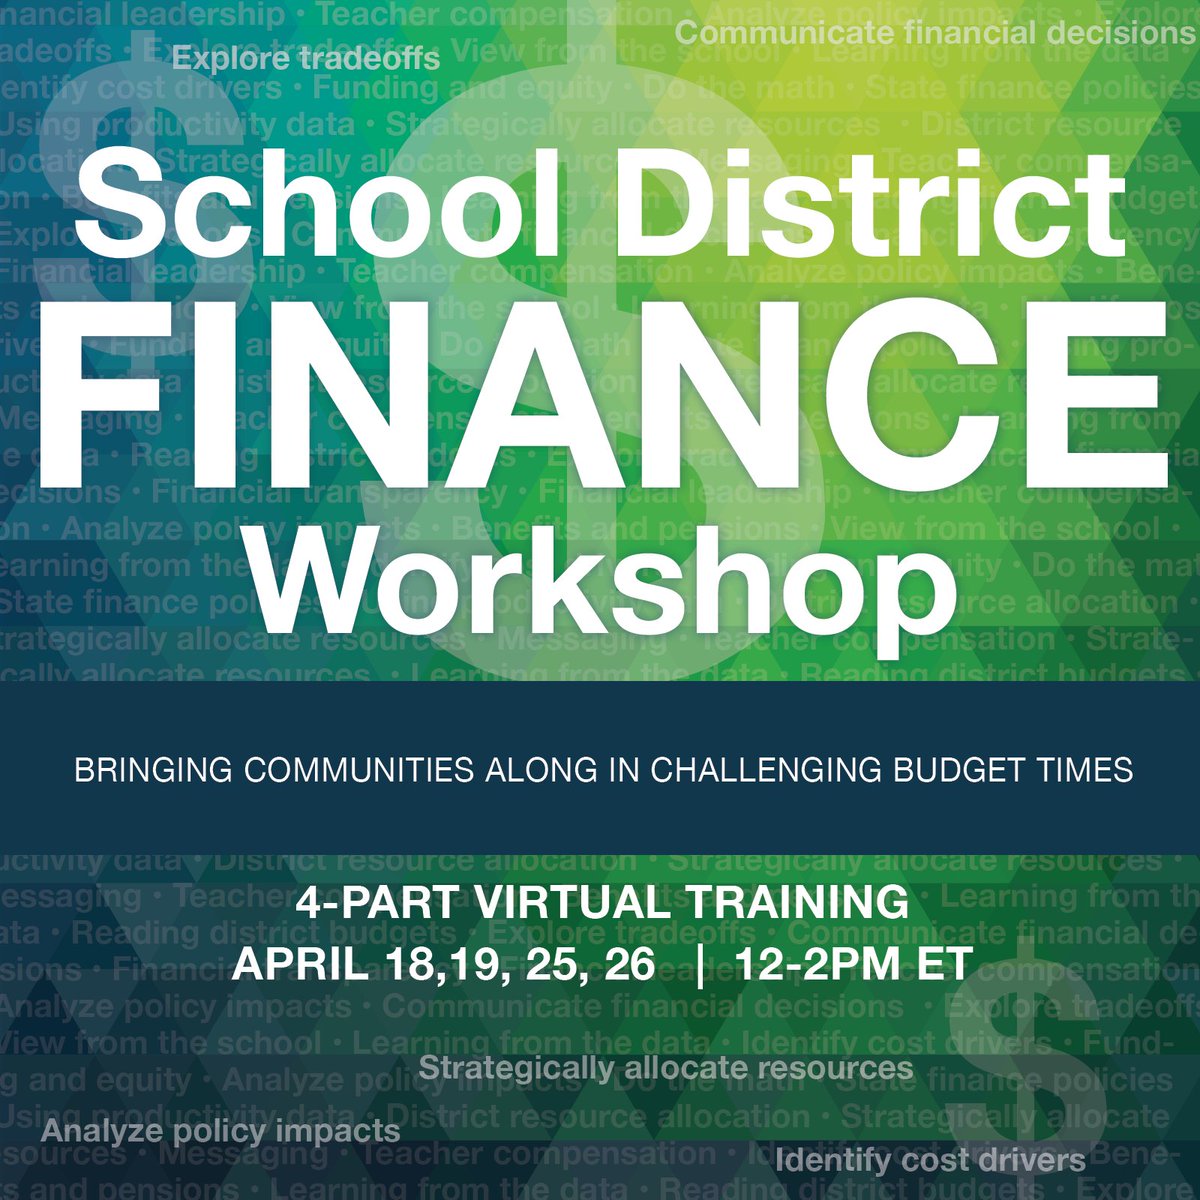 Sign-up for the School District Finance Workshop hosted by @edunomicslab! 4 virtual sessions Apr 18, 19, 25, & 26 from 12-2 PM ET. Topics on financial decision-making, communicating financial decisions, weighing important tradeoffs, and more. Register: ow.ly/BSGy50R8FyO